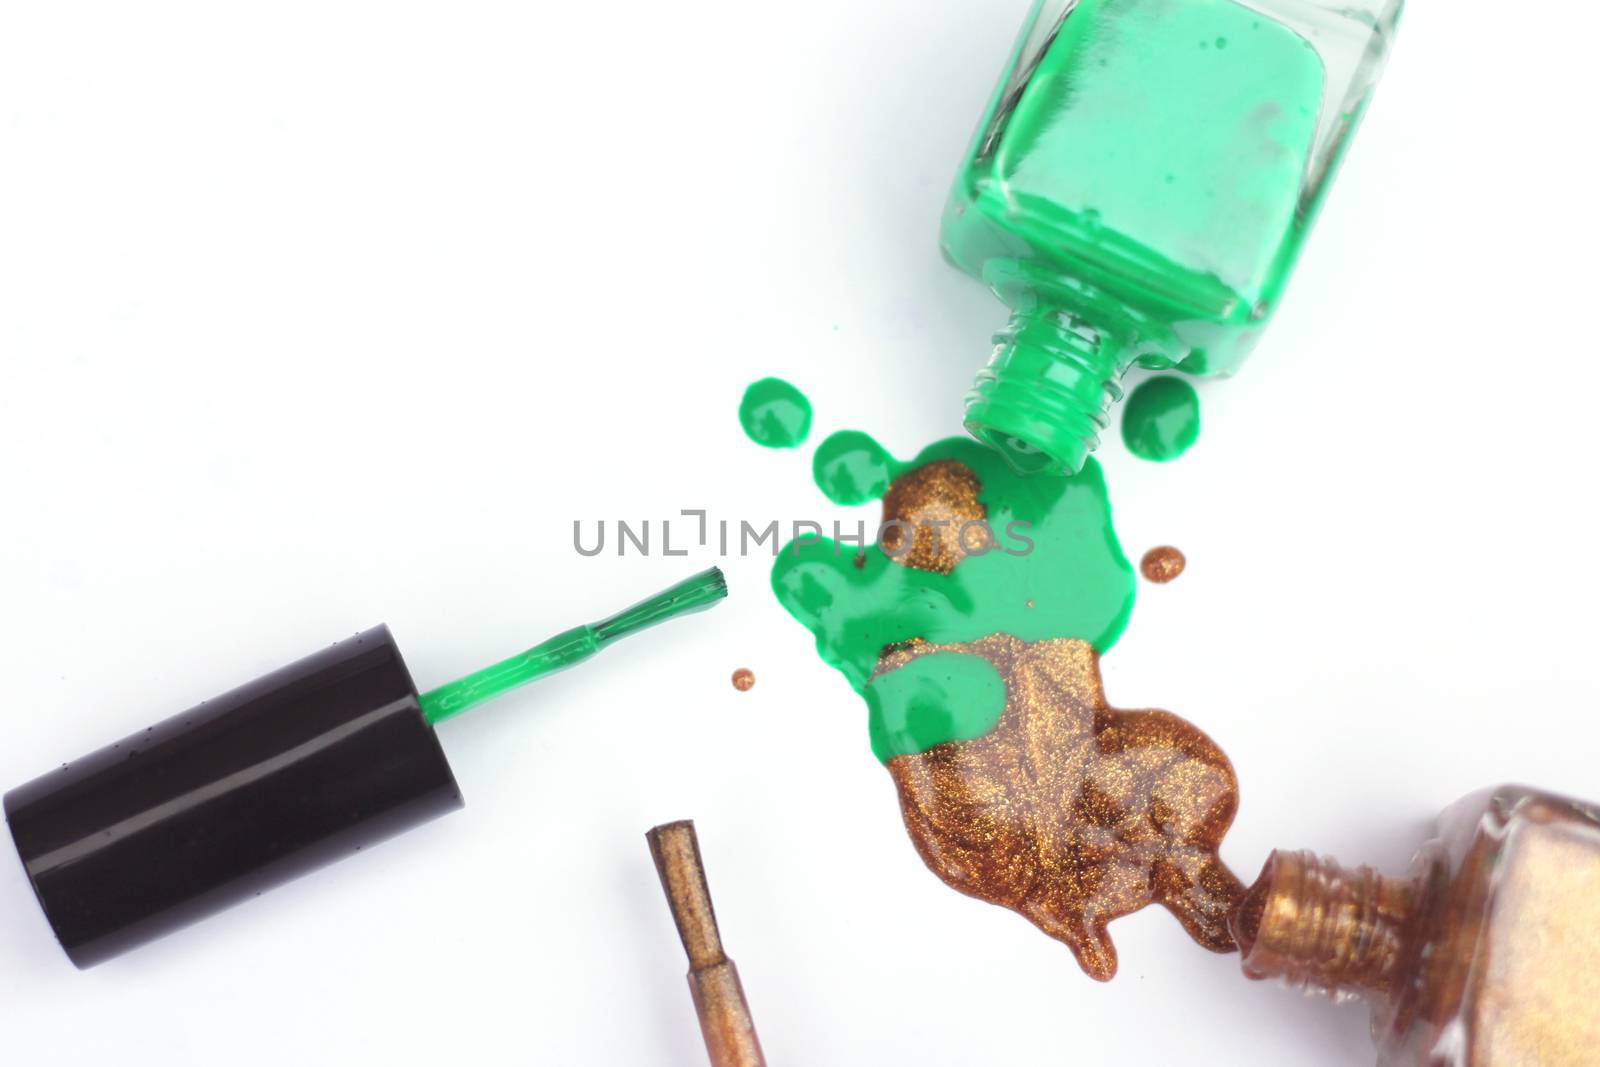 Green and Gold Nail polish  Spilled on White Paper